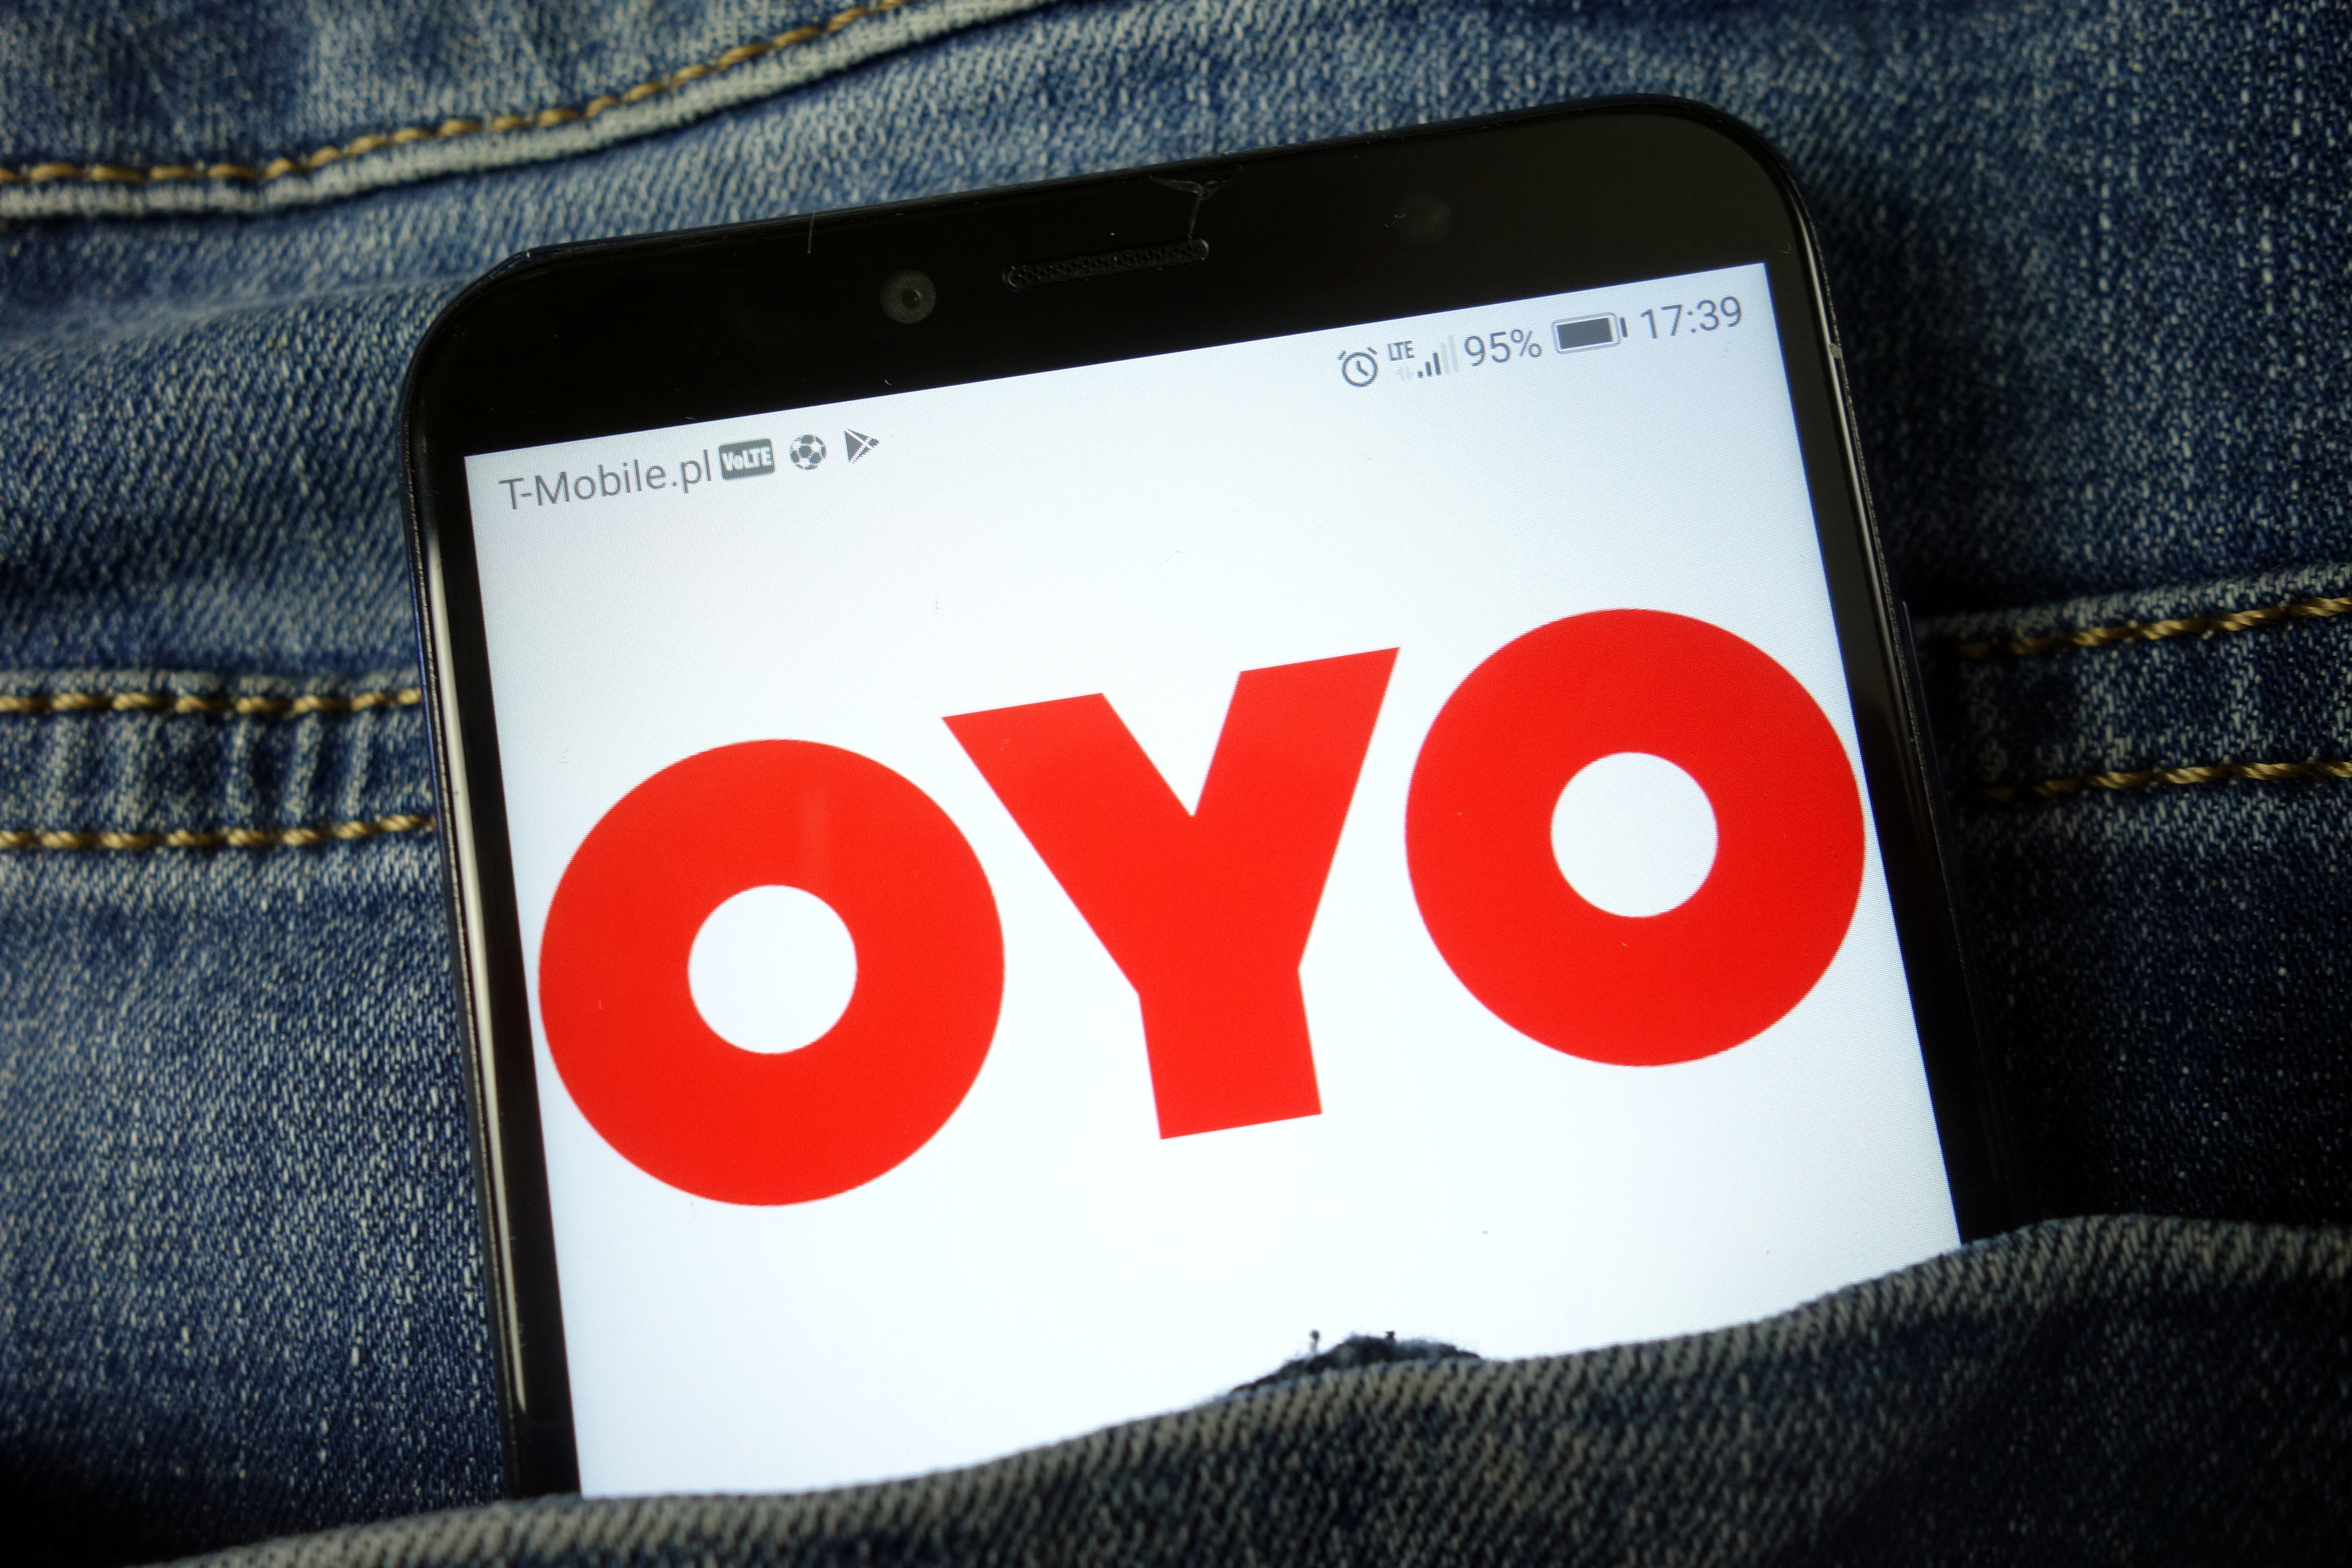 Microsoft may invest in SoftBank-backed Oyo at USD 9 billion valuation: Report